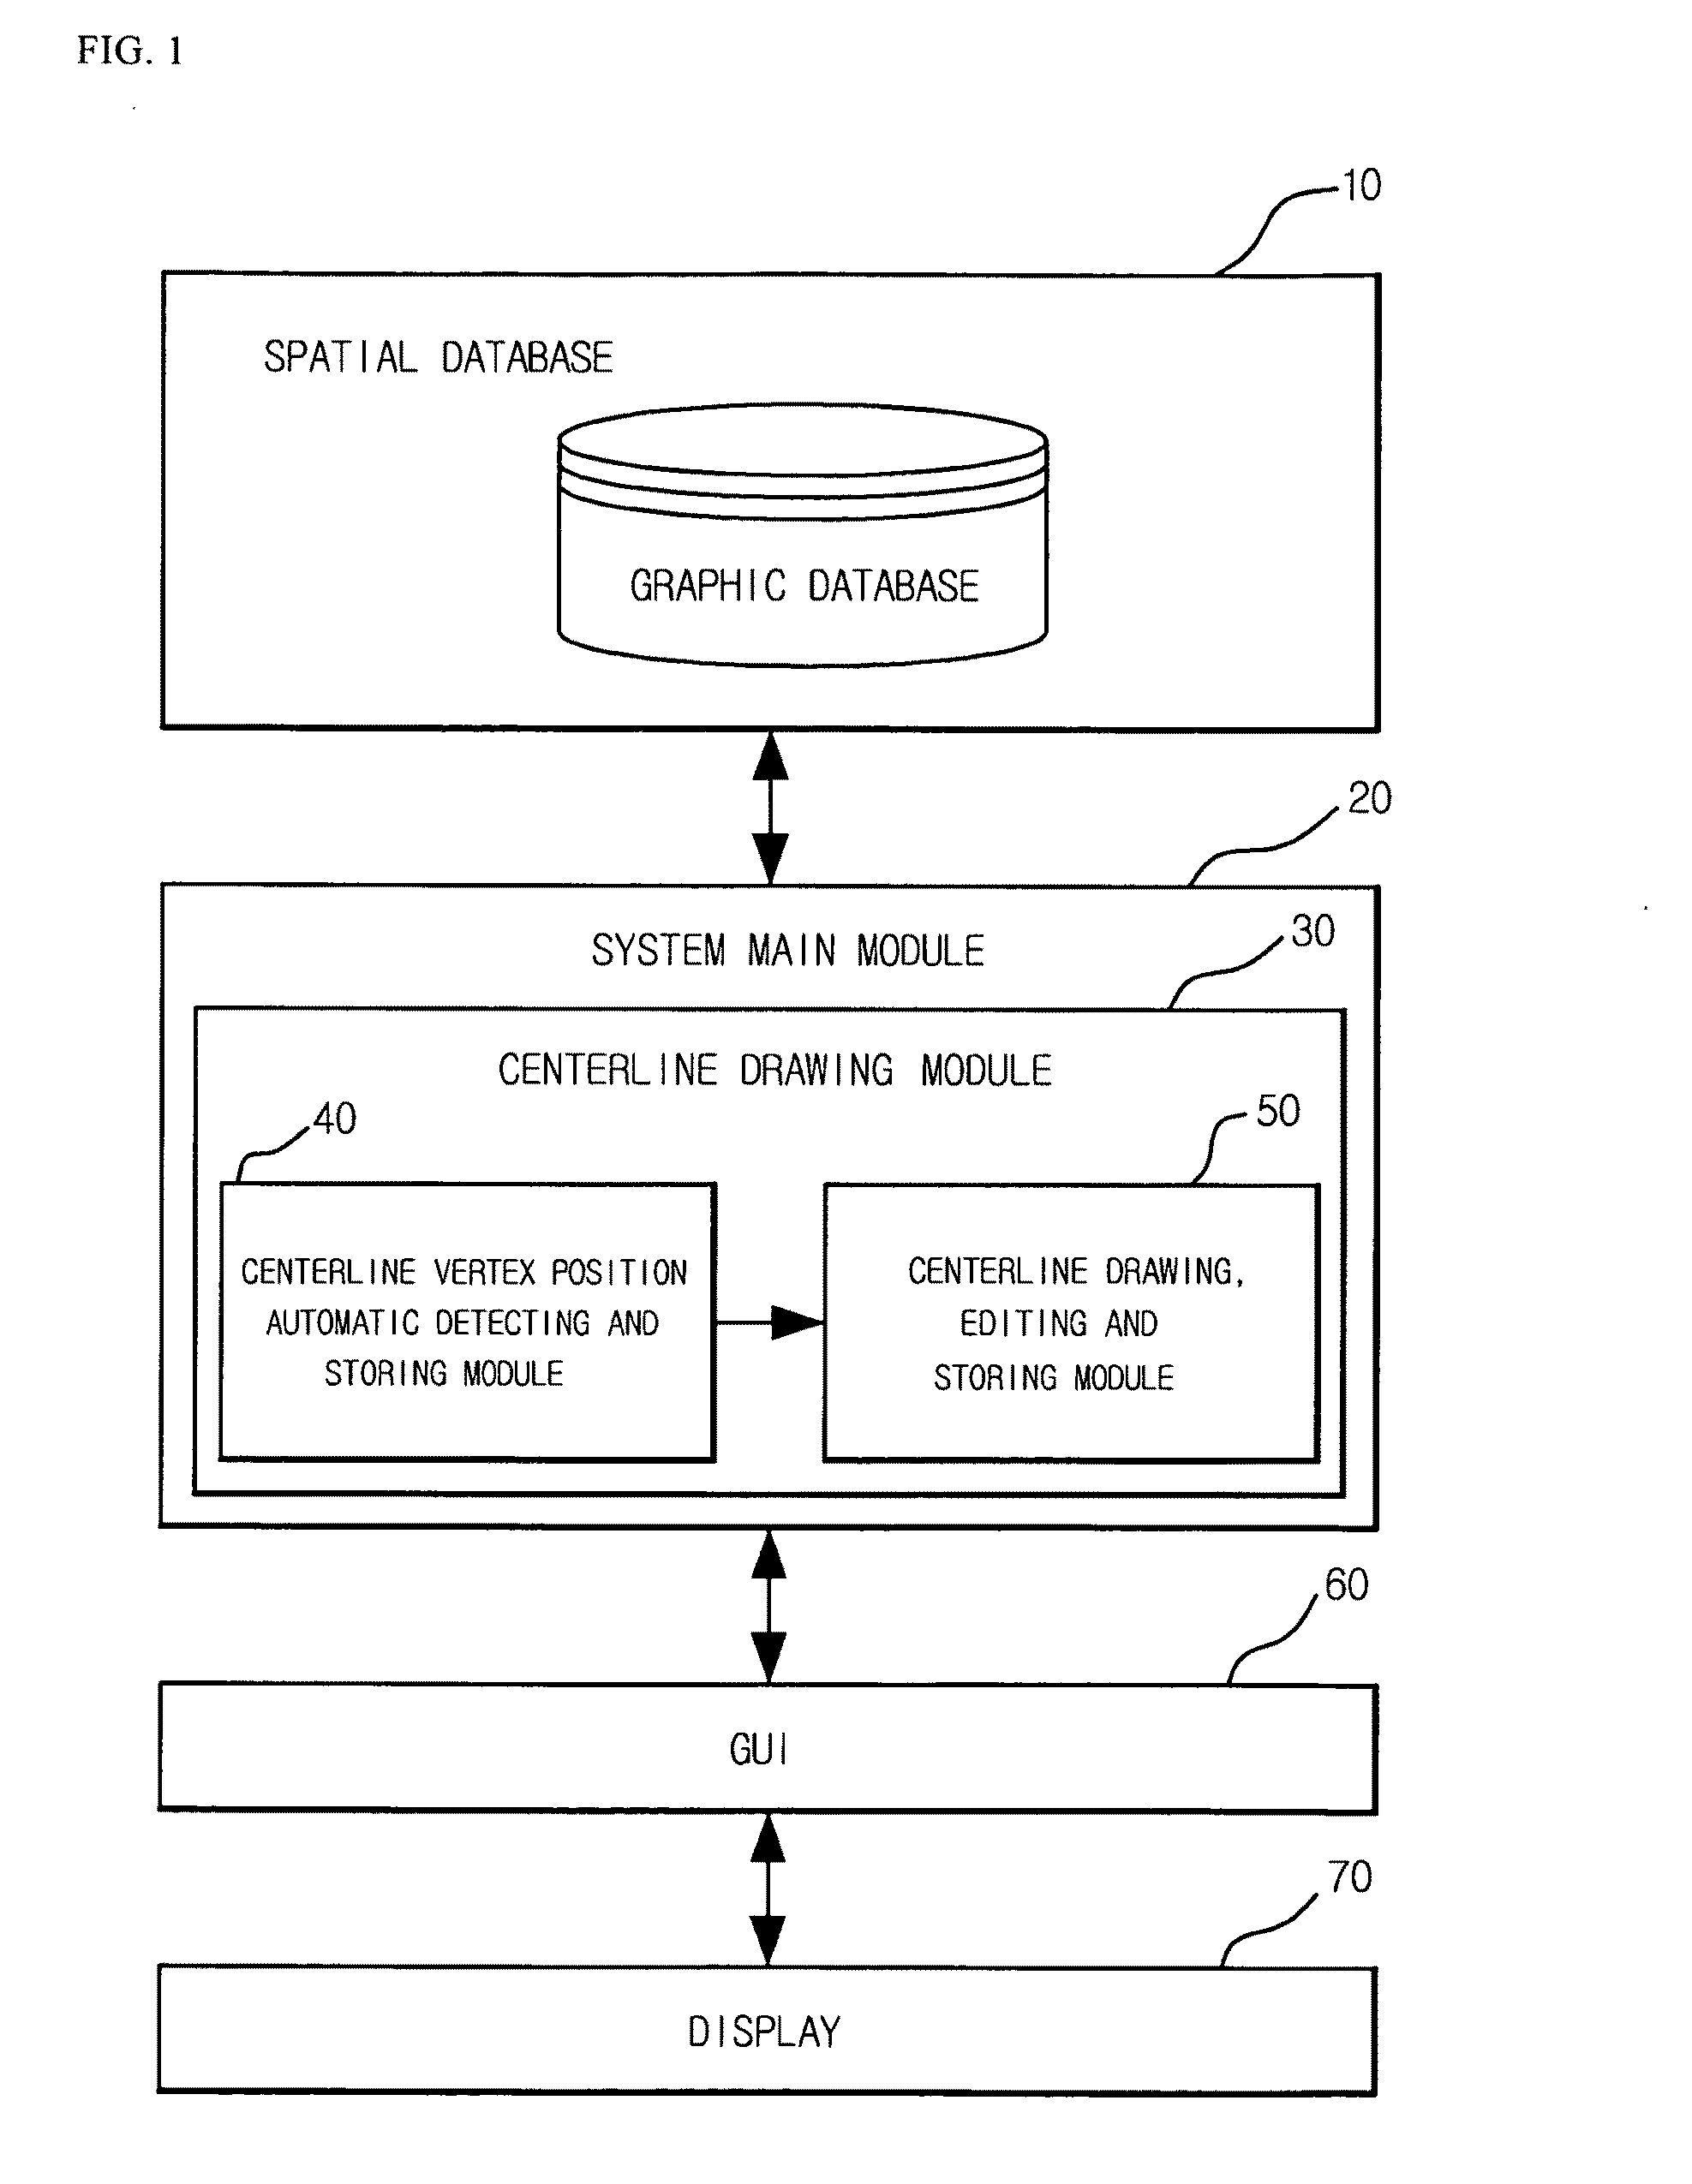 System and method for drawing stream and road centerline for GIS-based linear map production